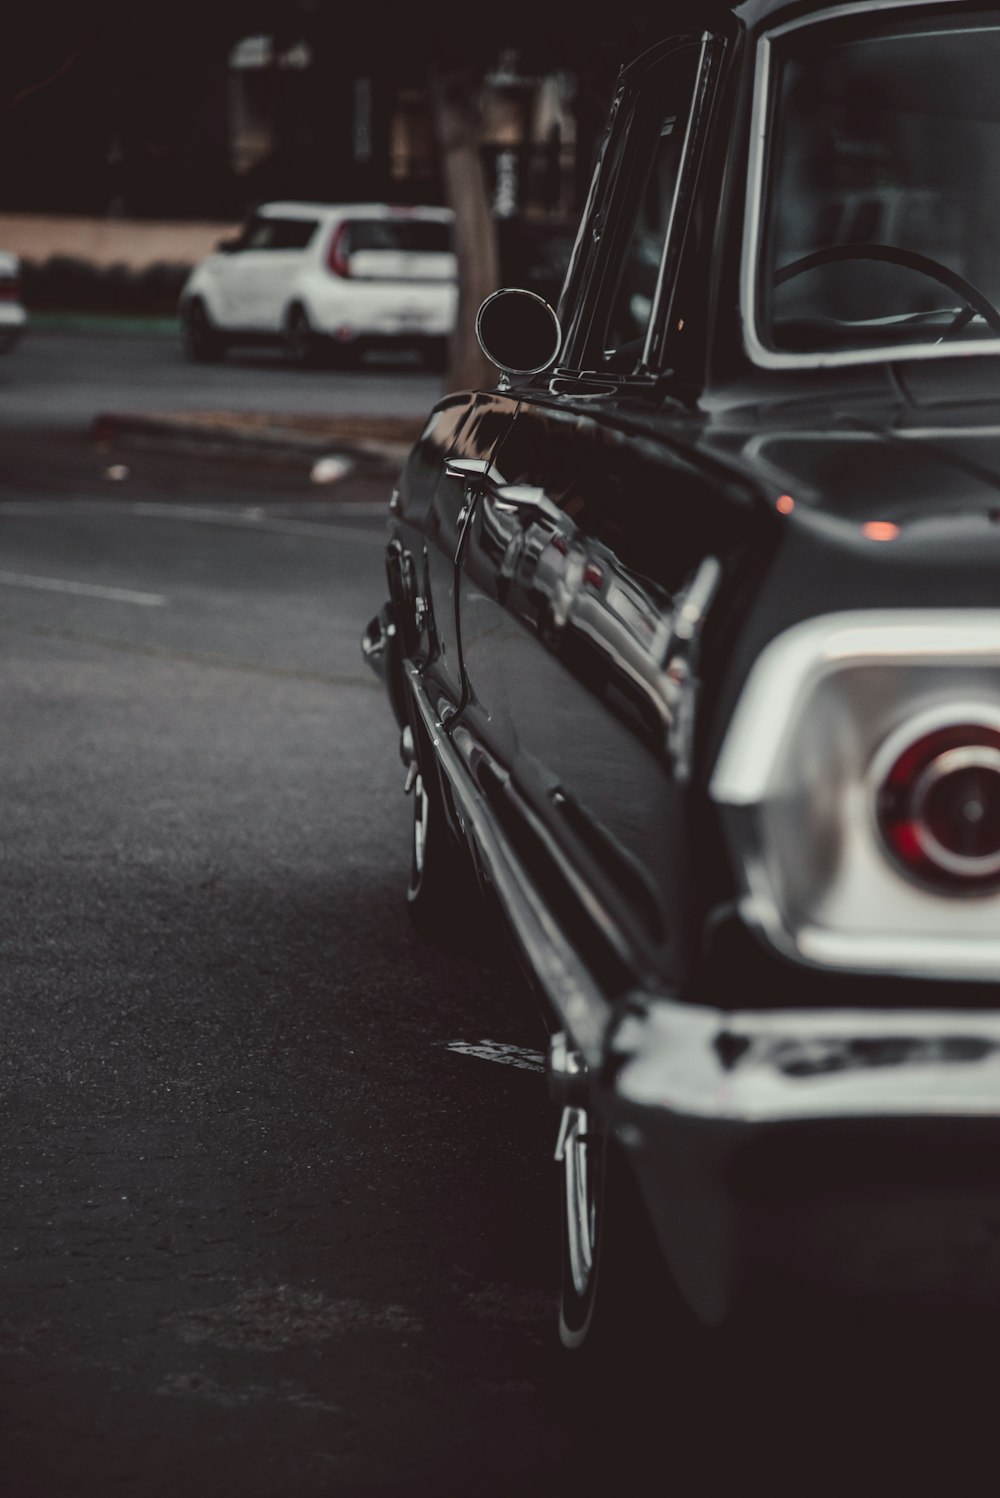 black and white vintage car on road during daytime